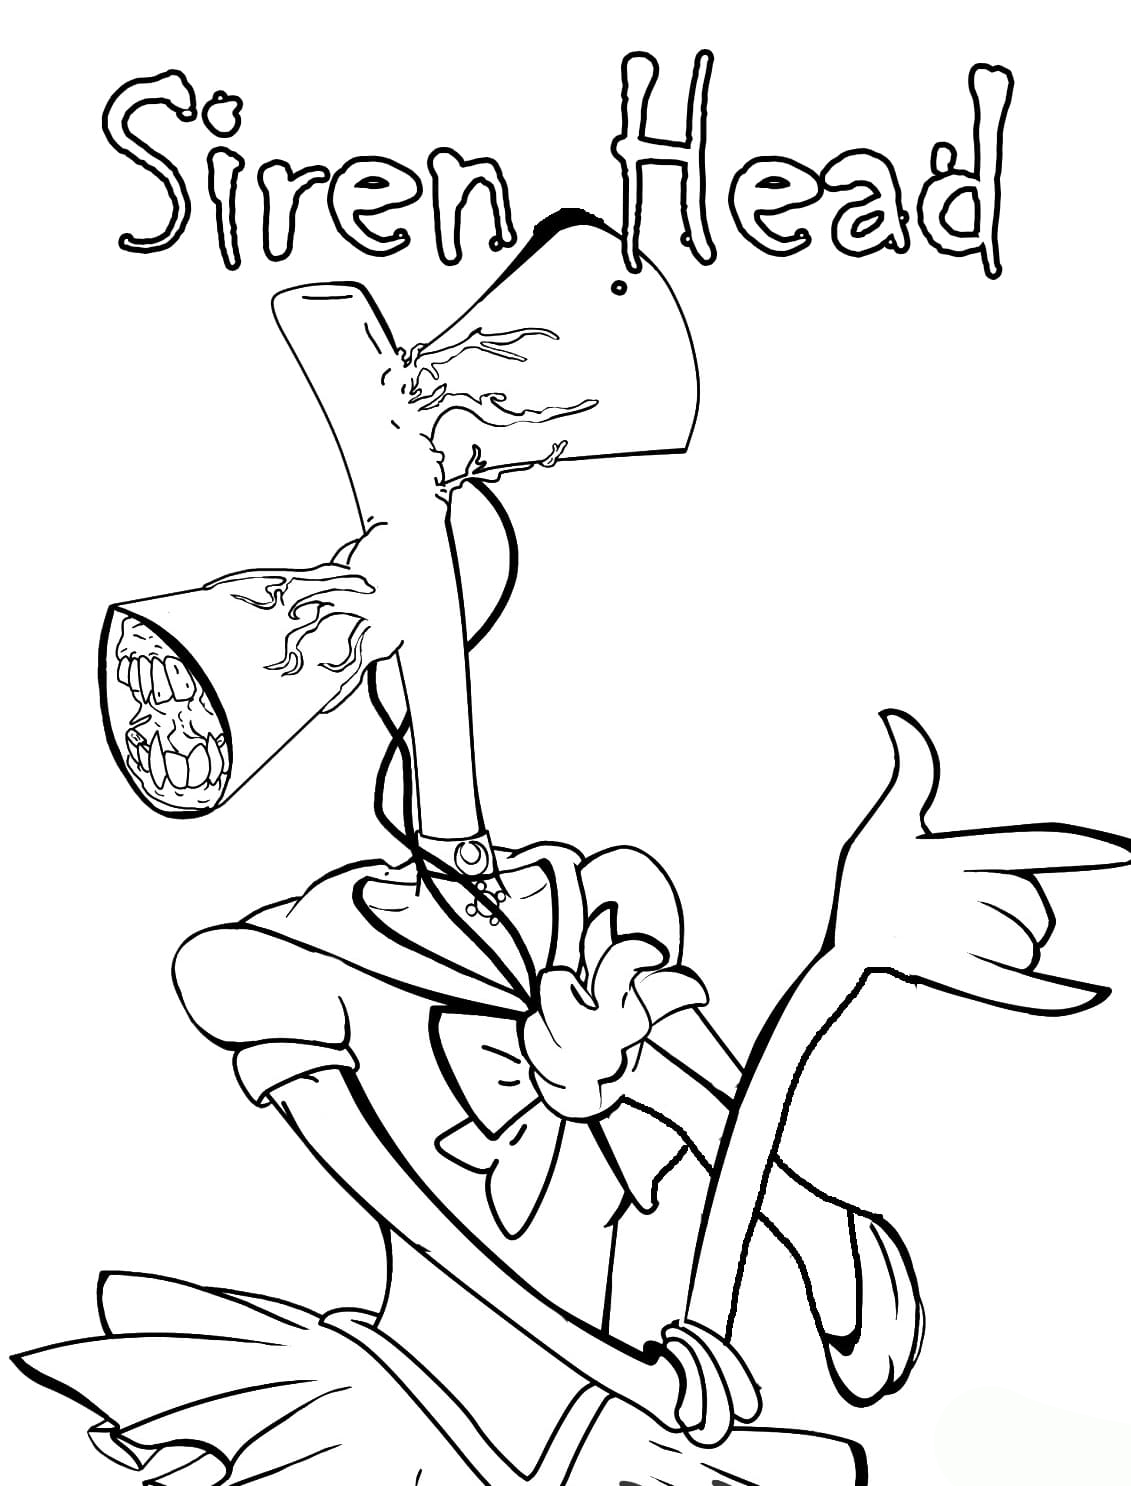 Coloring page Siren Head In A4 format